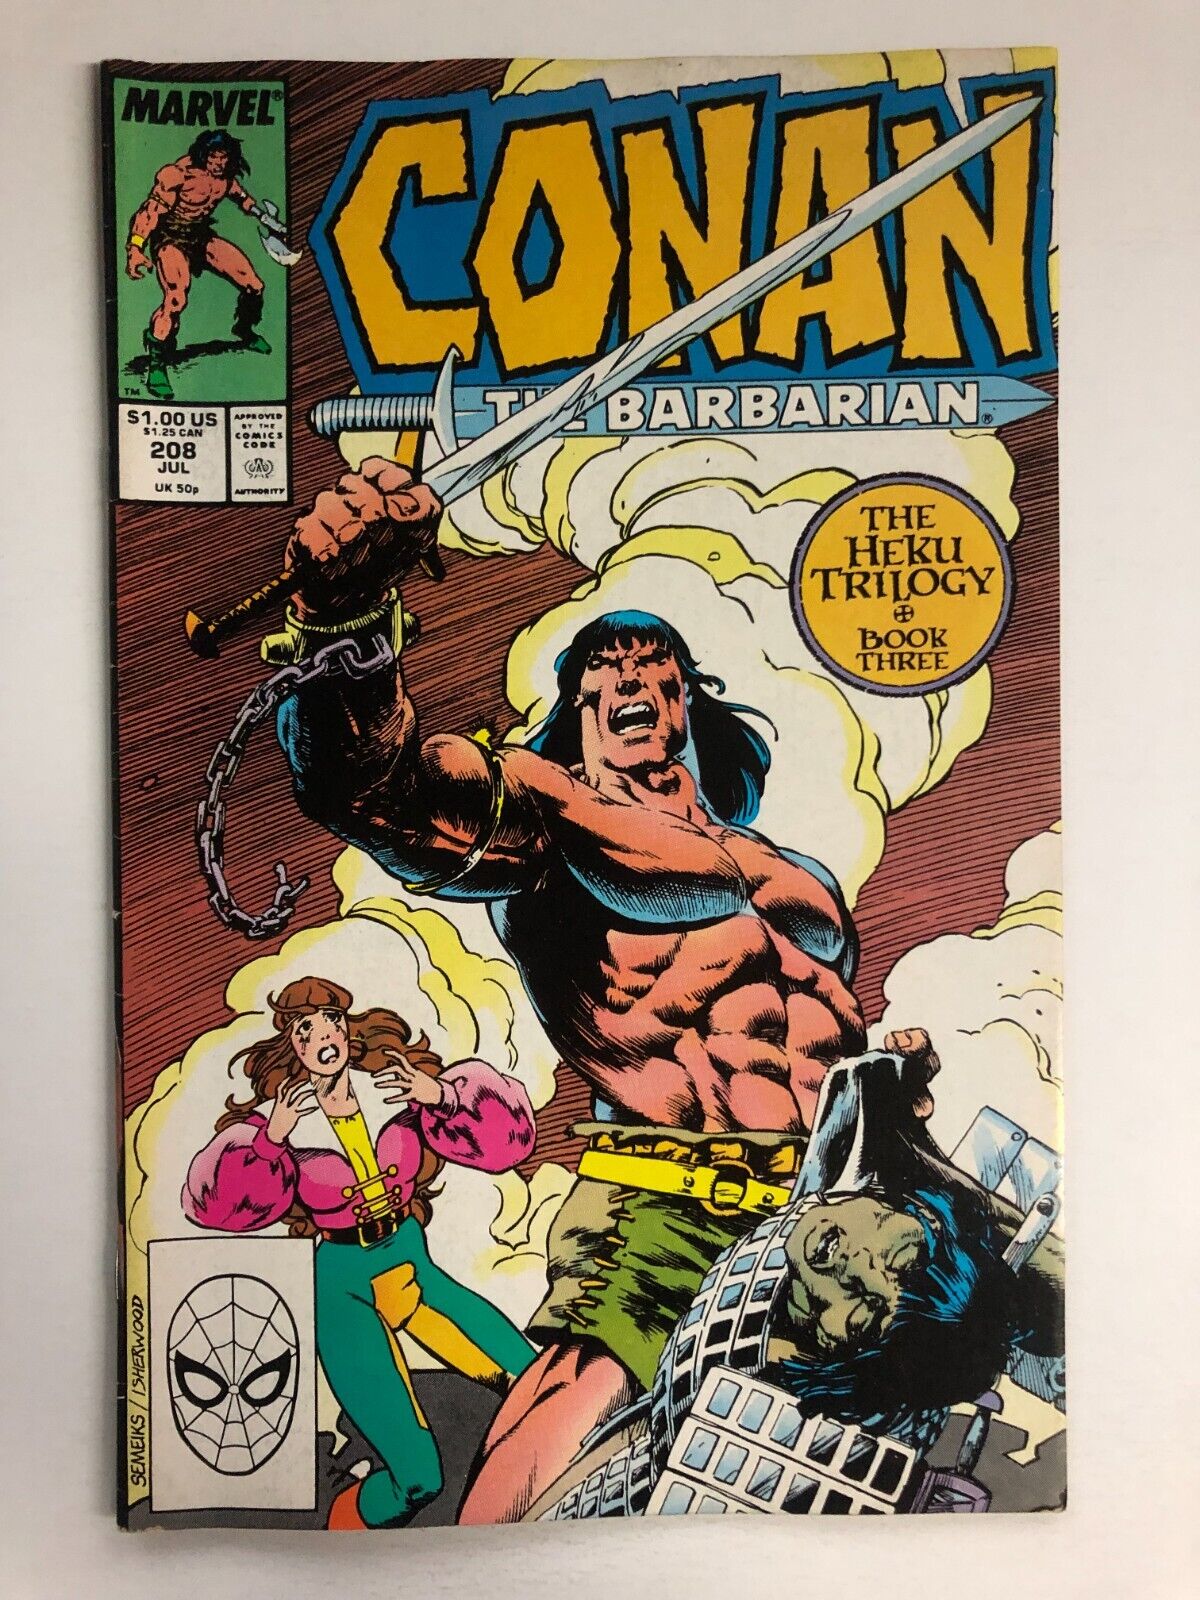 Conan The Barbarian #208	- James Owsley - 1988 - Possible CGC comic